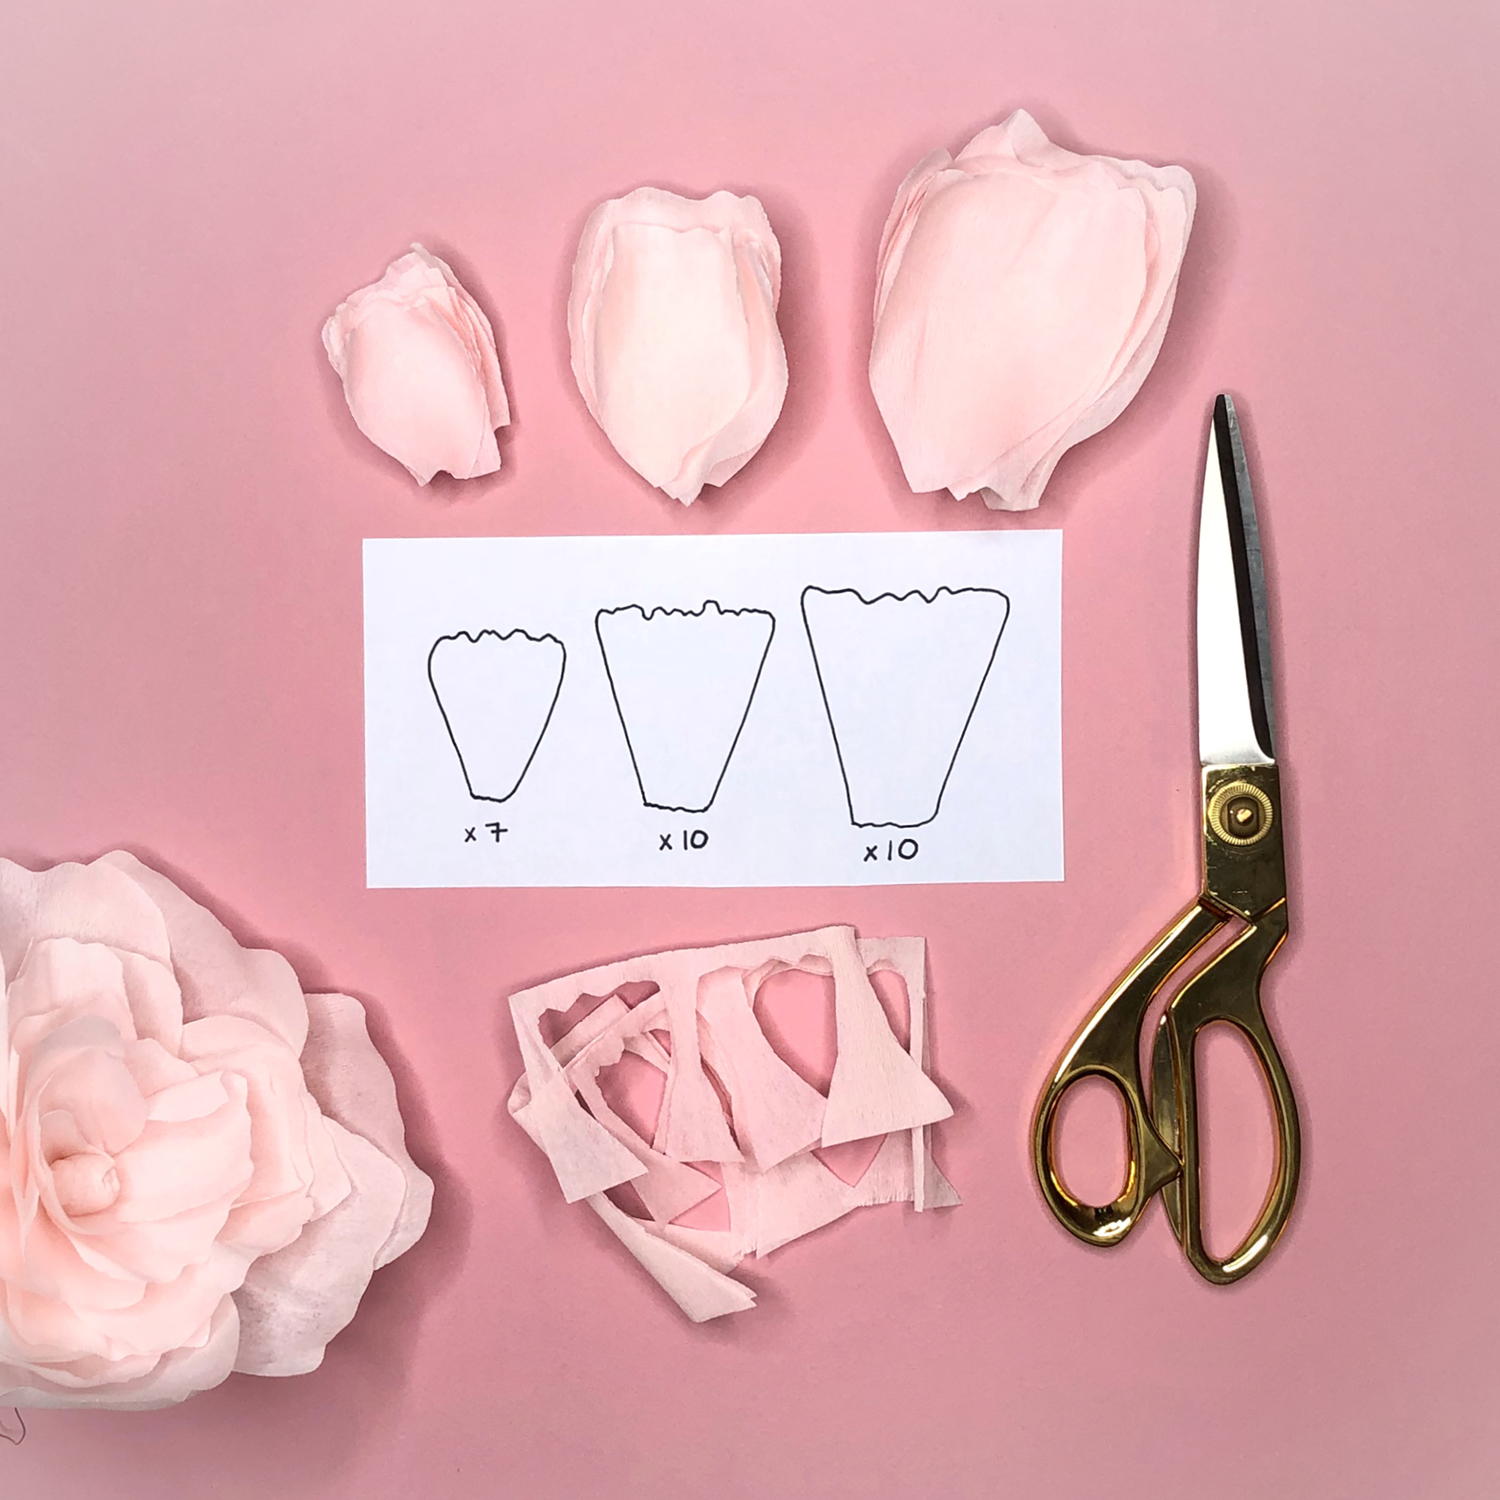 How to Make Easy Paper Flowers by Jessica Mack of BrownPaperBunny on behalf of Tombow